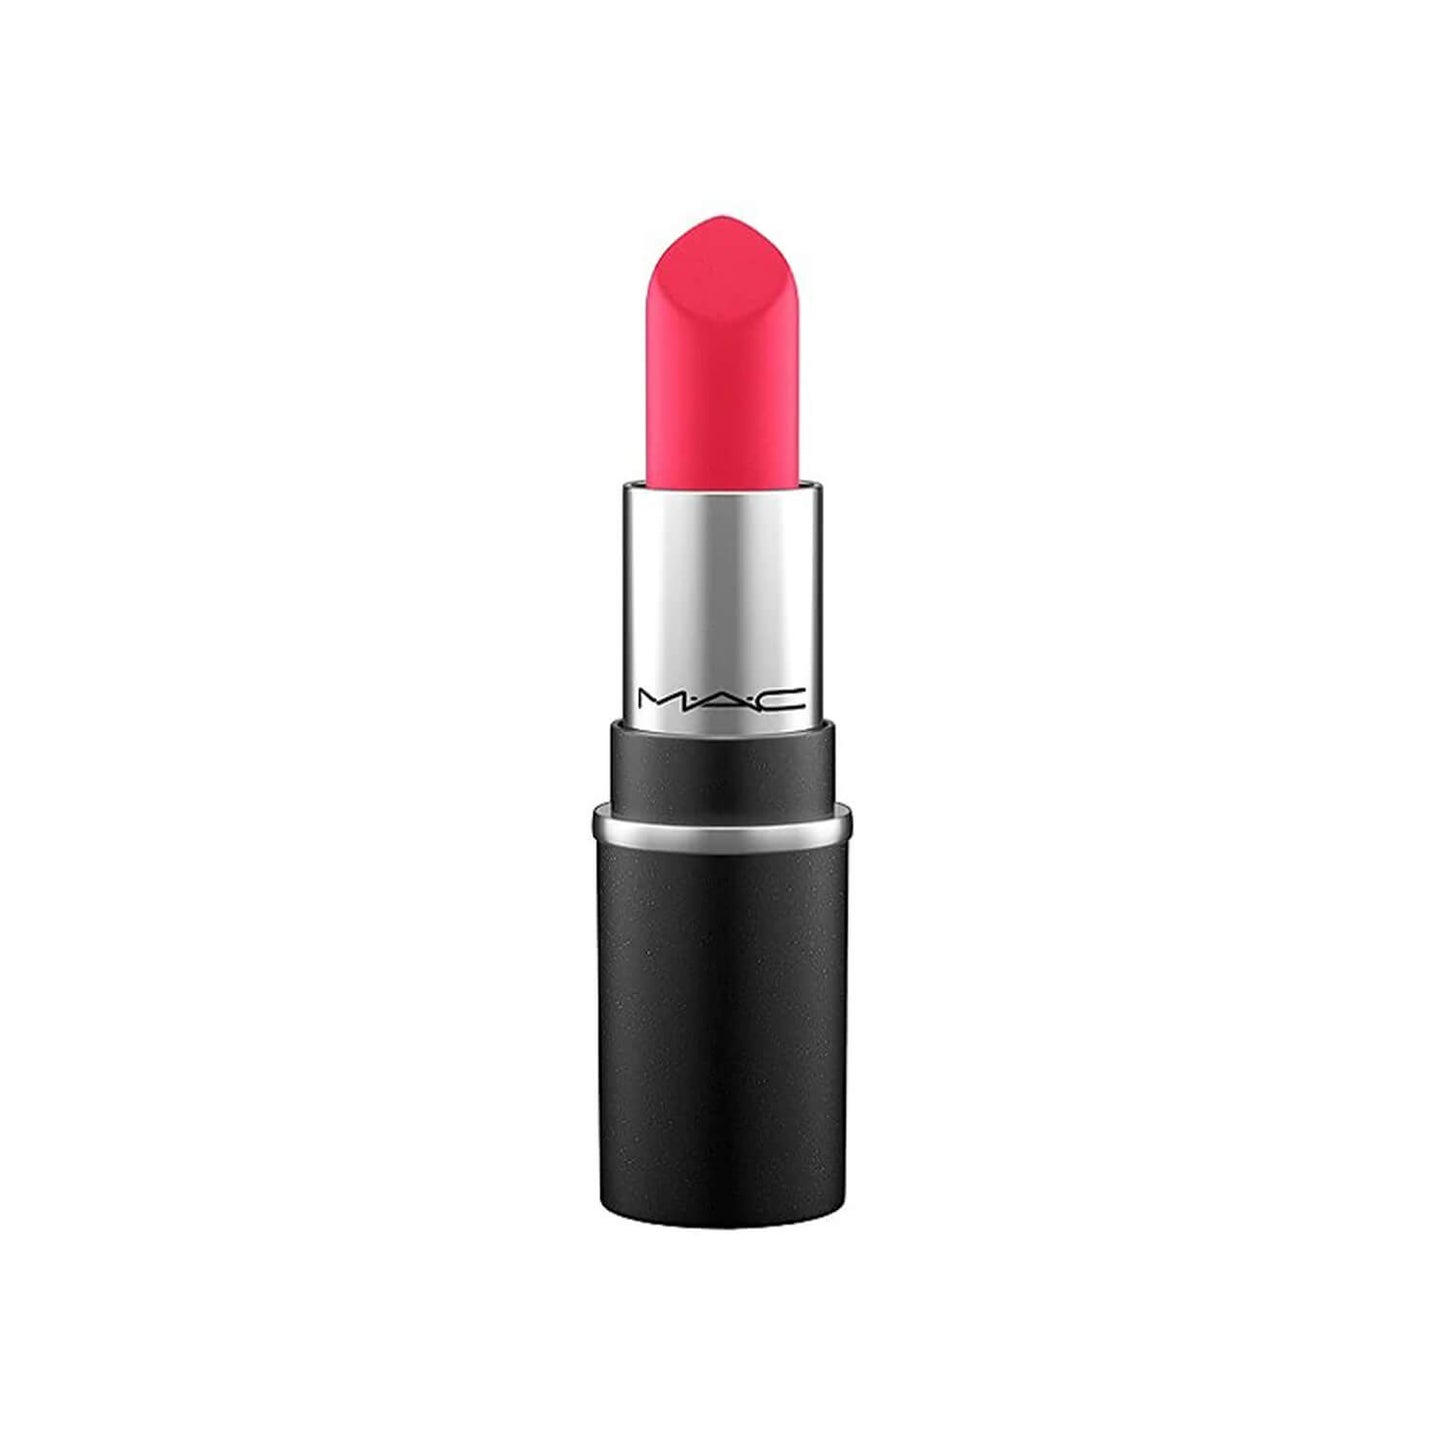 shop mac mini lipstick relentlessly red available at heygirl.pk for delivery in karachi lahore islamabad pakistan